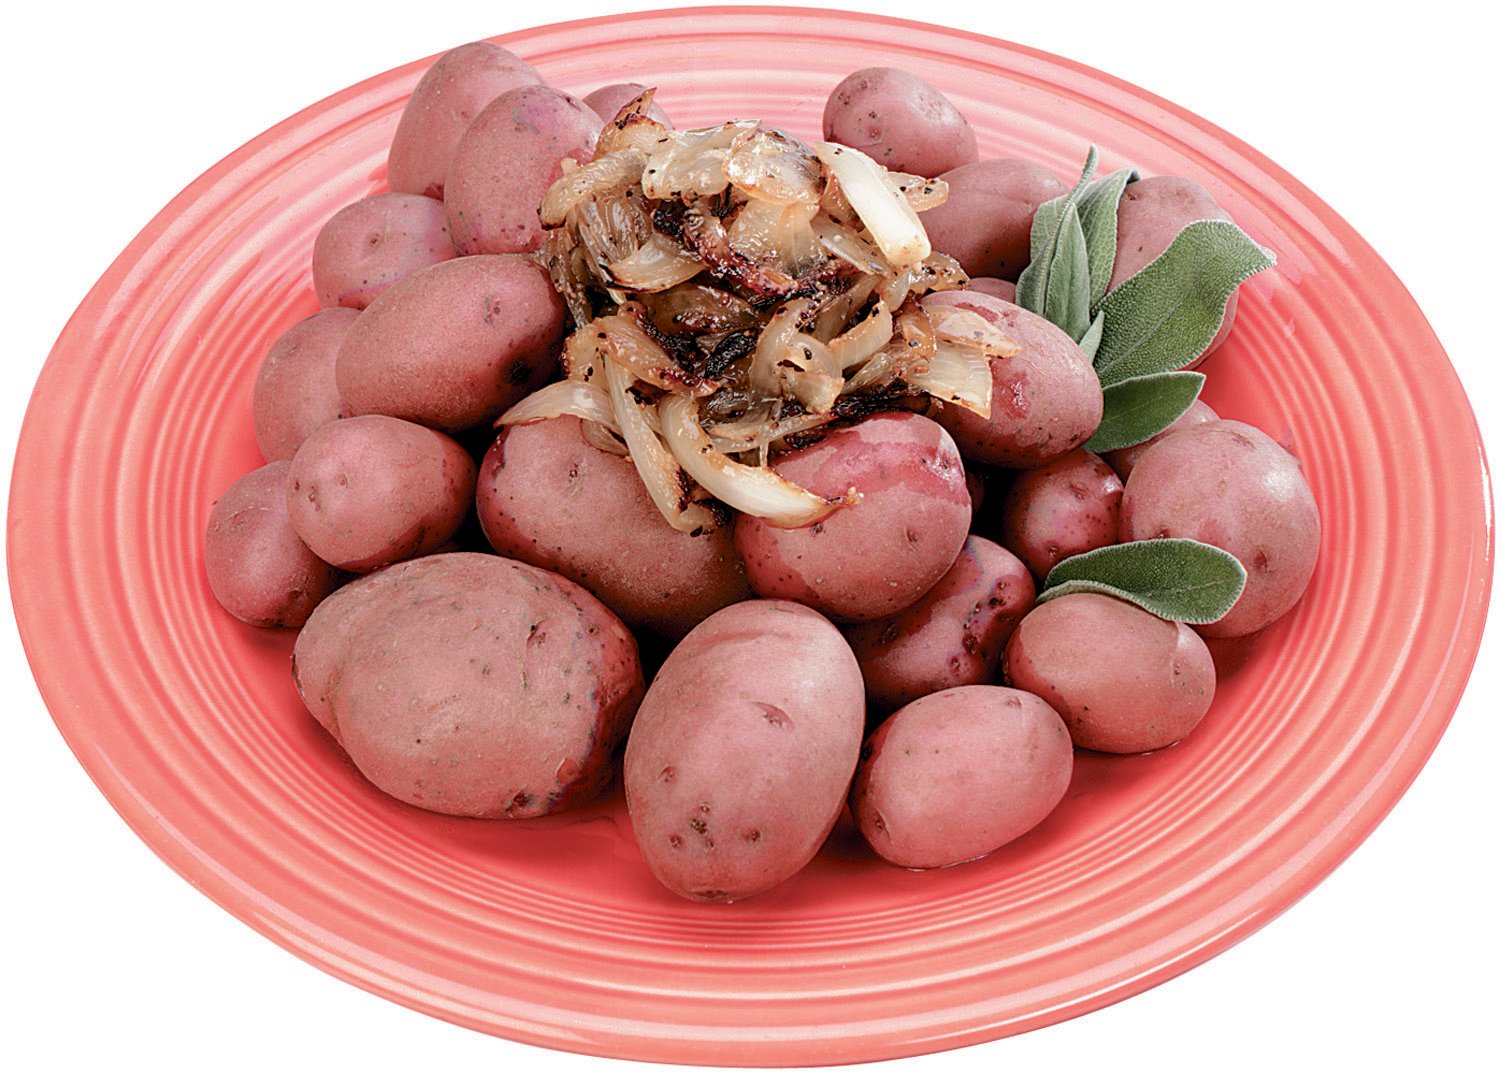 Red Potatoes on a Plate Food Picture